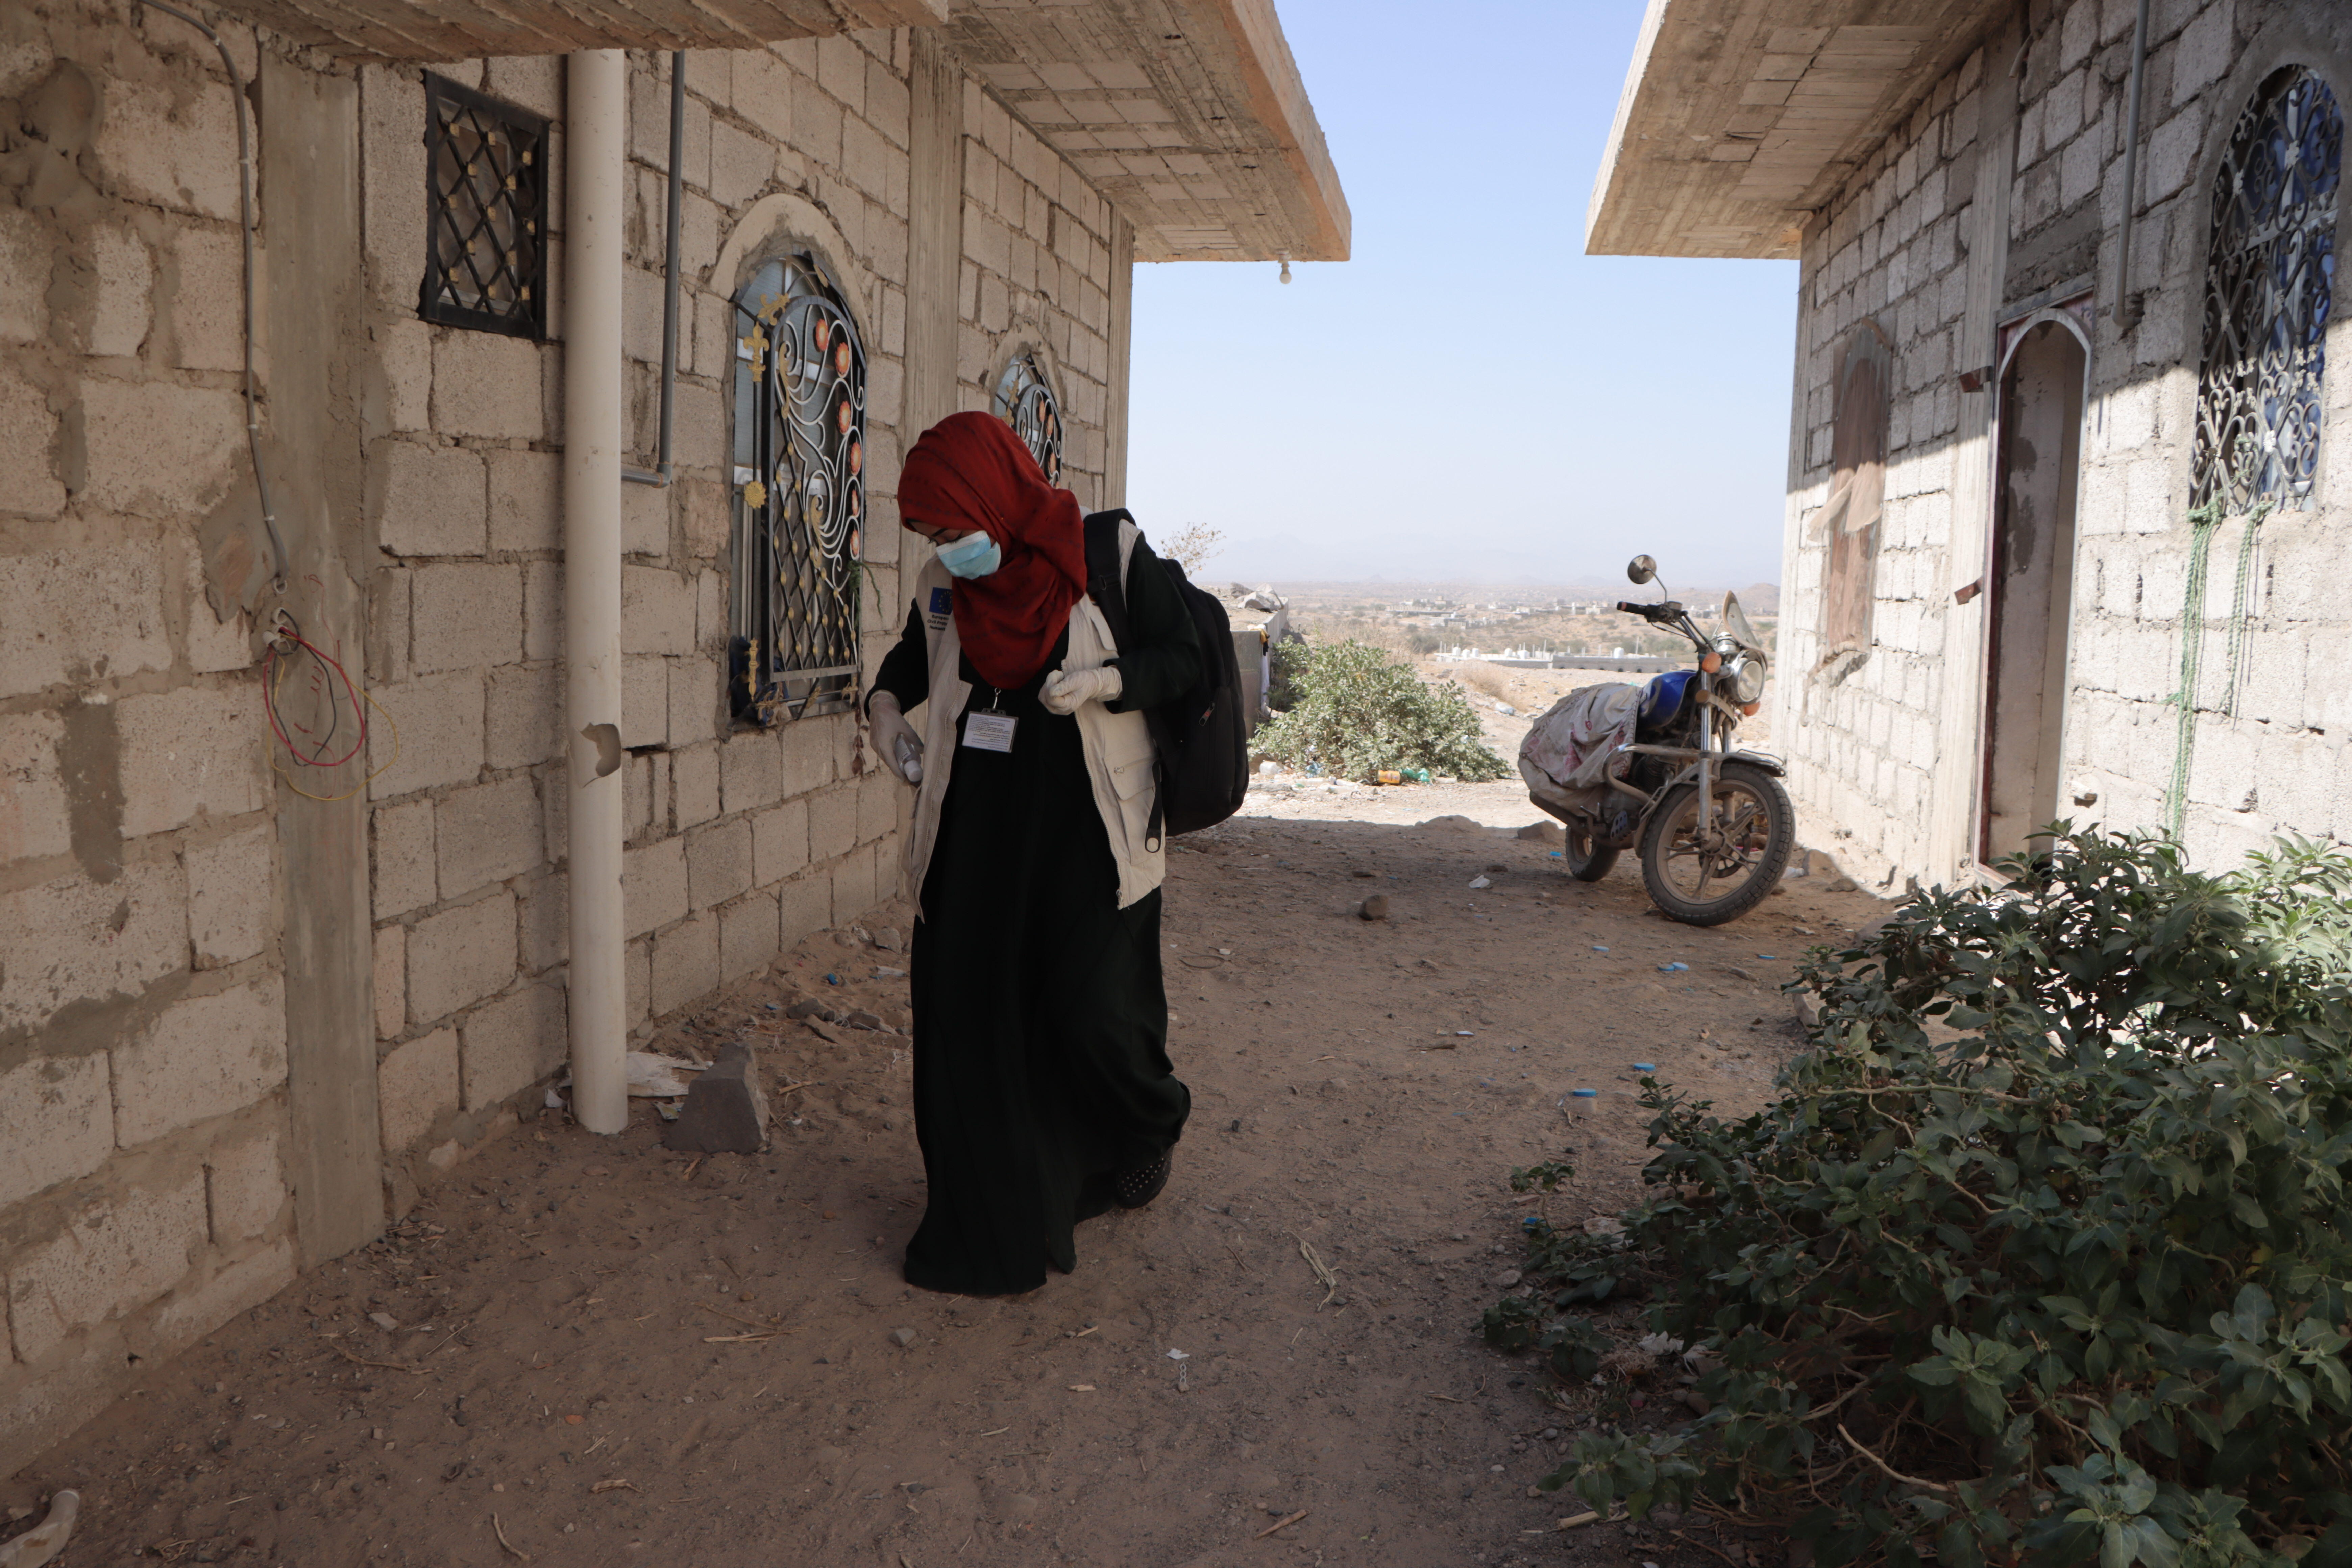 Dr. Bushra walking in a remote village in Yemen, where she travels with an IRC mobile medical team to provide reproductive health care to women.